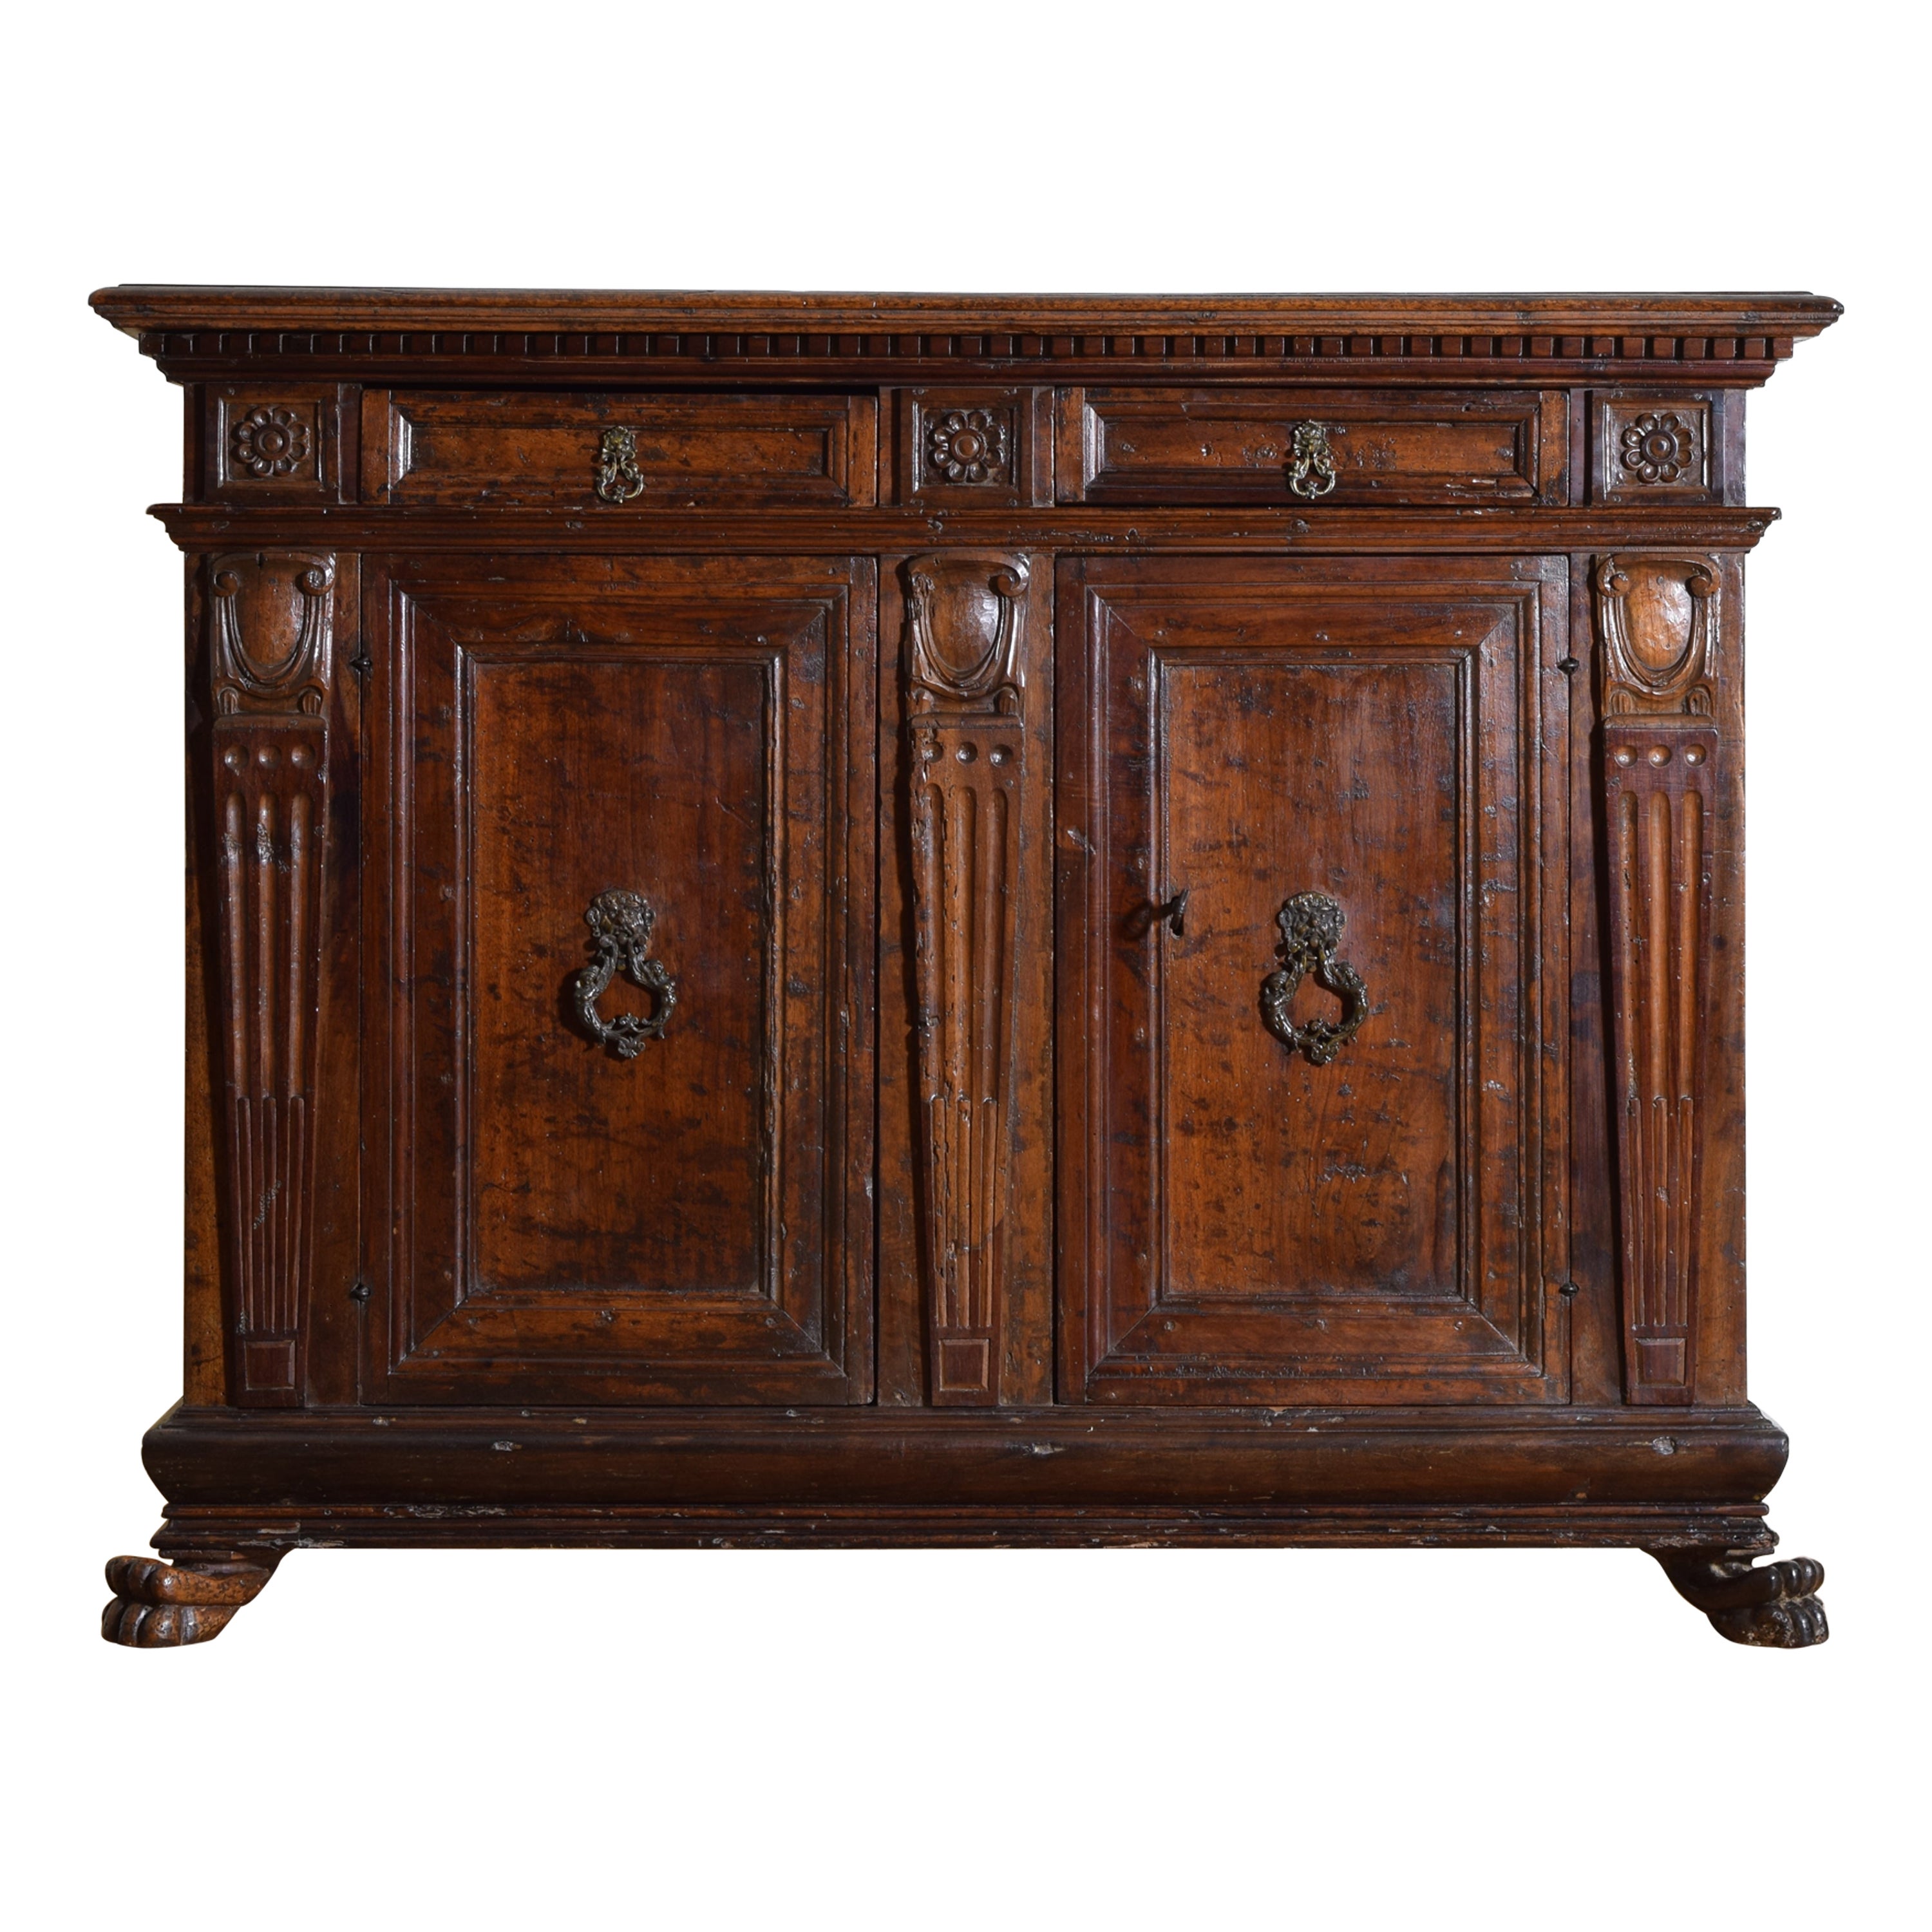 Early 17th Century Case Pieces and Storage Cabinets